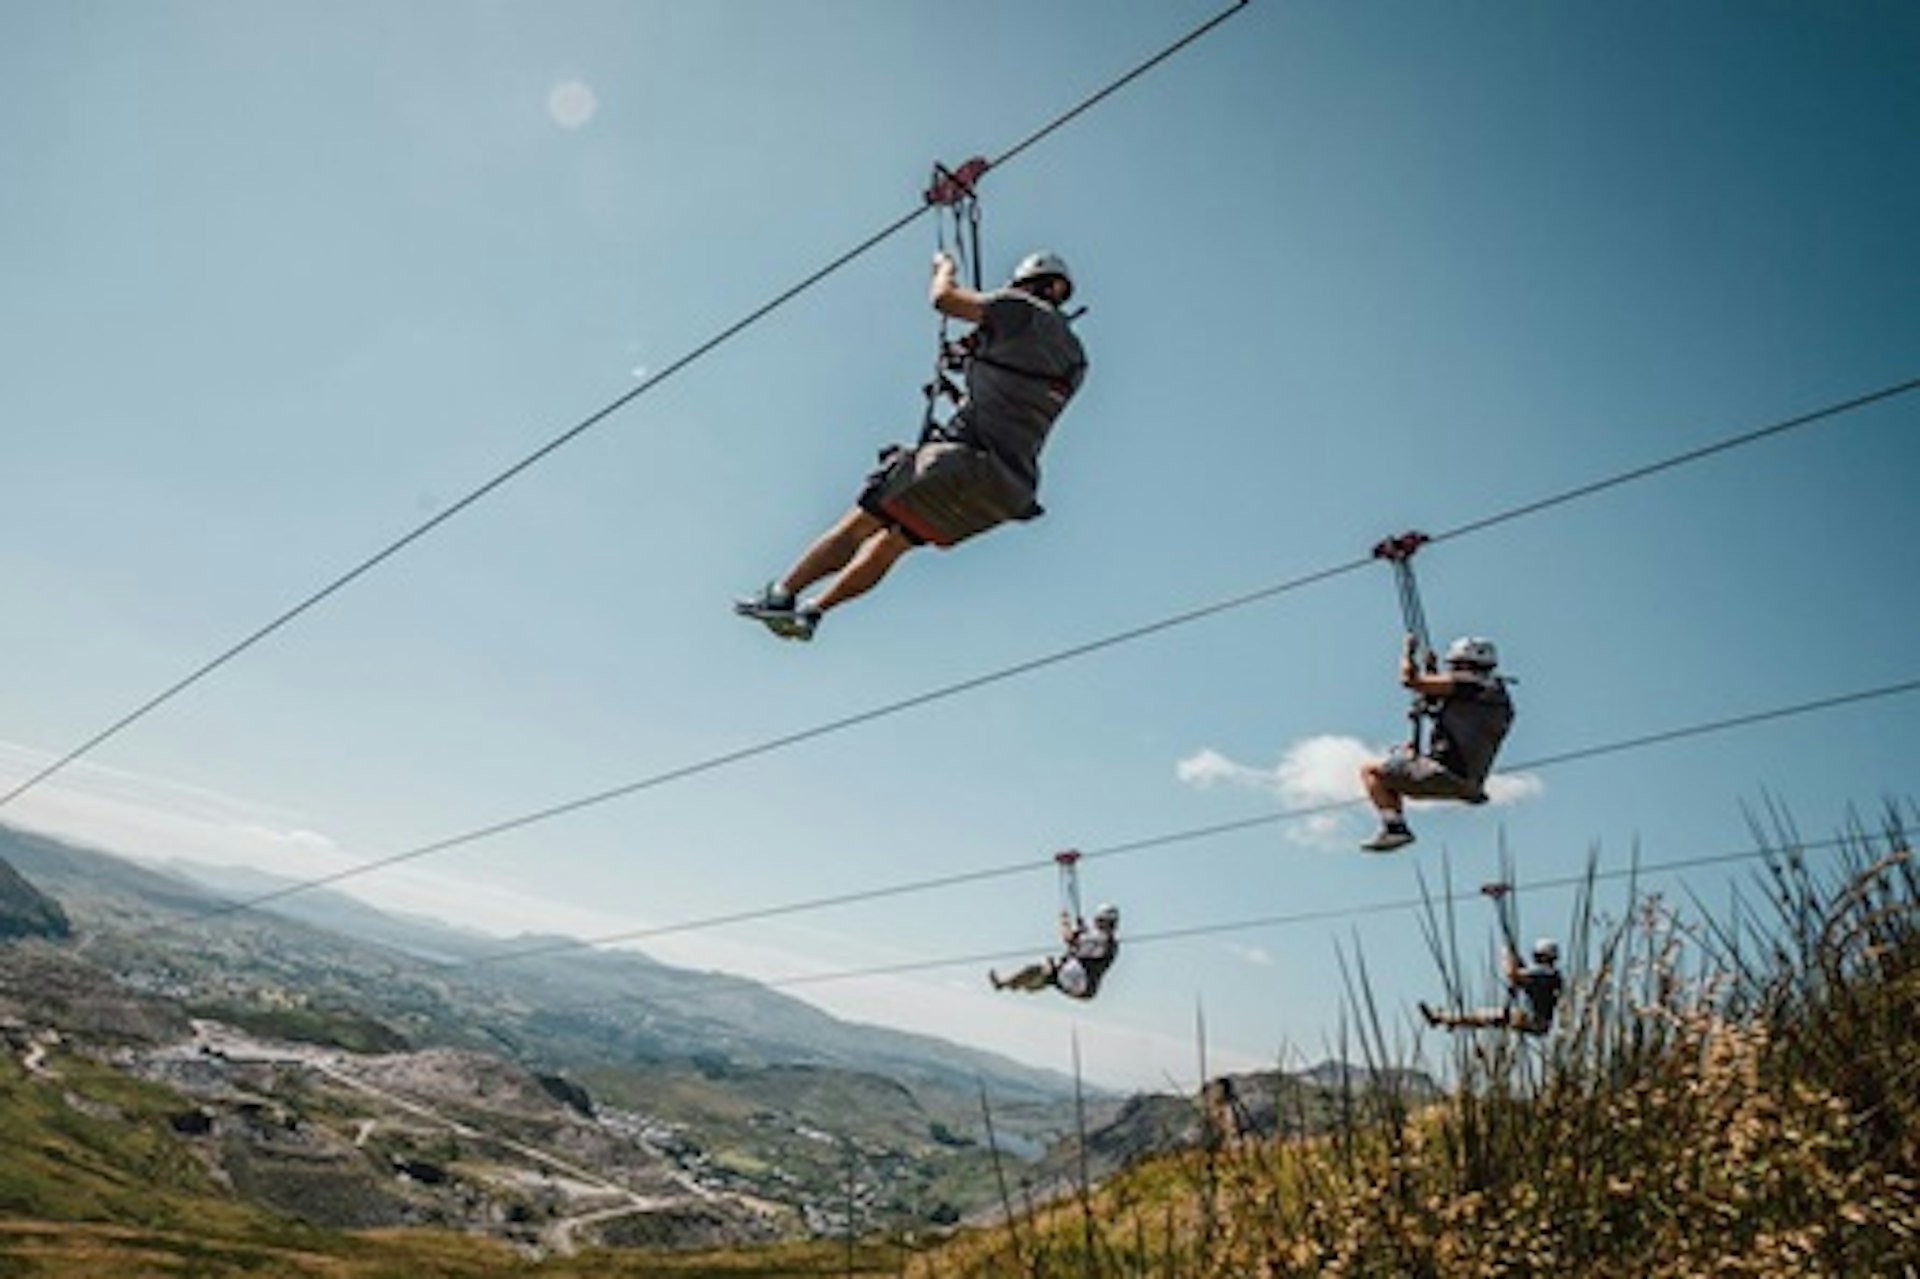 Fly the Phoenix - The World's Fastest Seated Zip Line at Zip World for Two 1